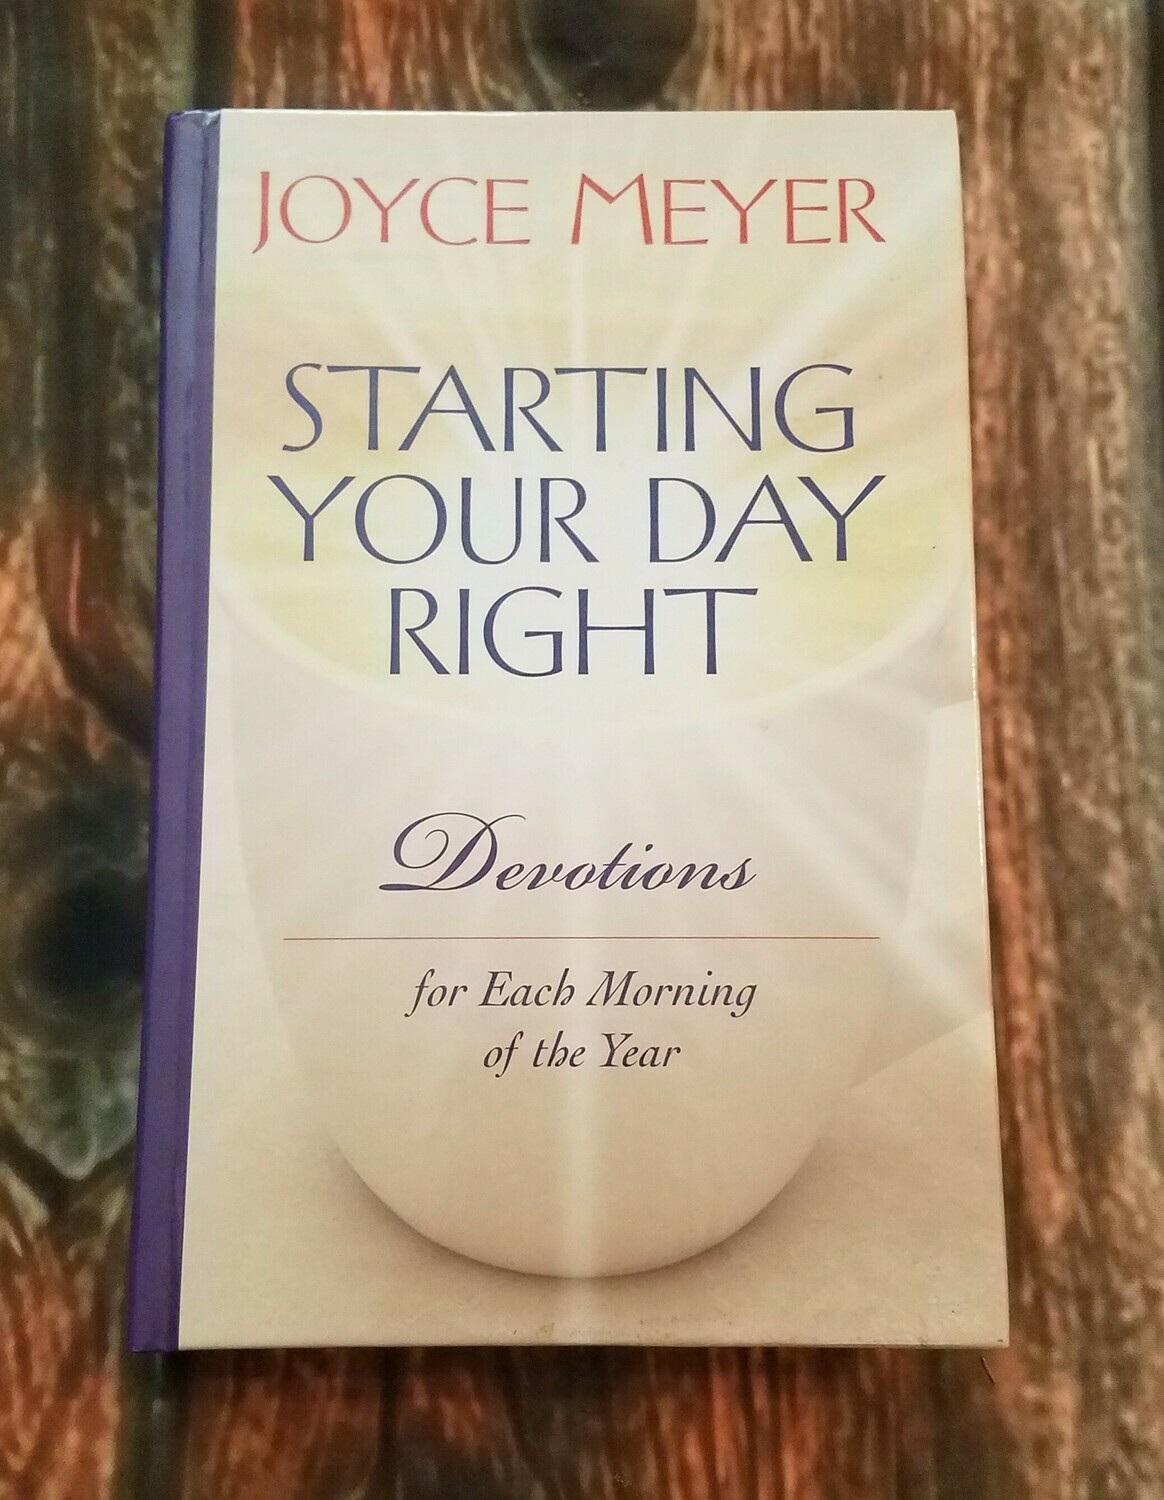 Starting Your Day Right: Devotions for Each Morning of the Year by Joyce Meyer